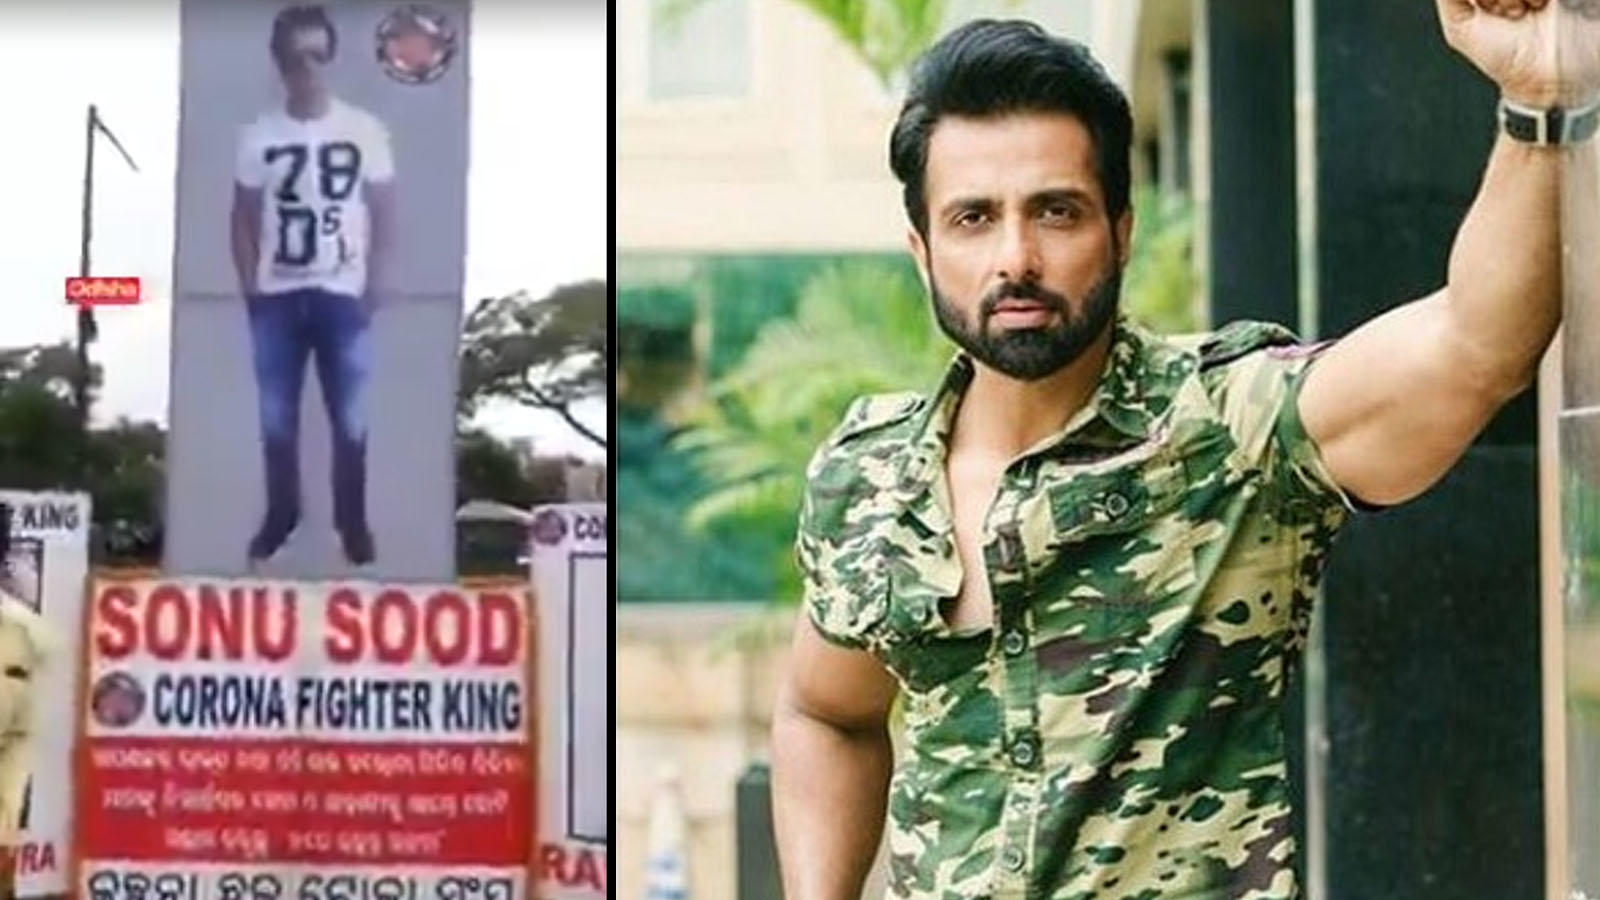 Sonu Sood's Odia fans put a large hoarding of the actor and name ...